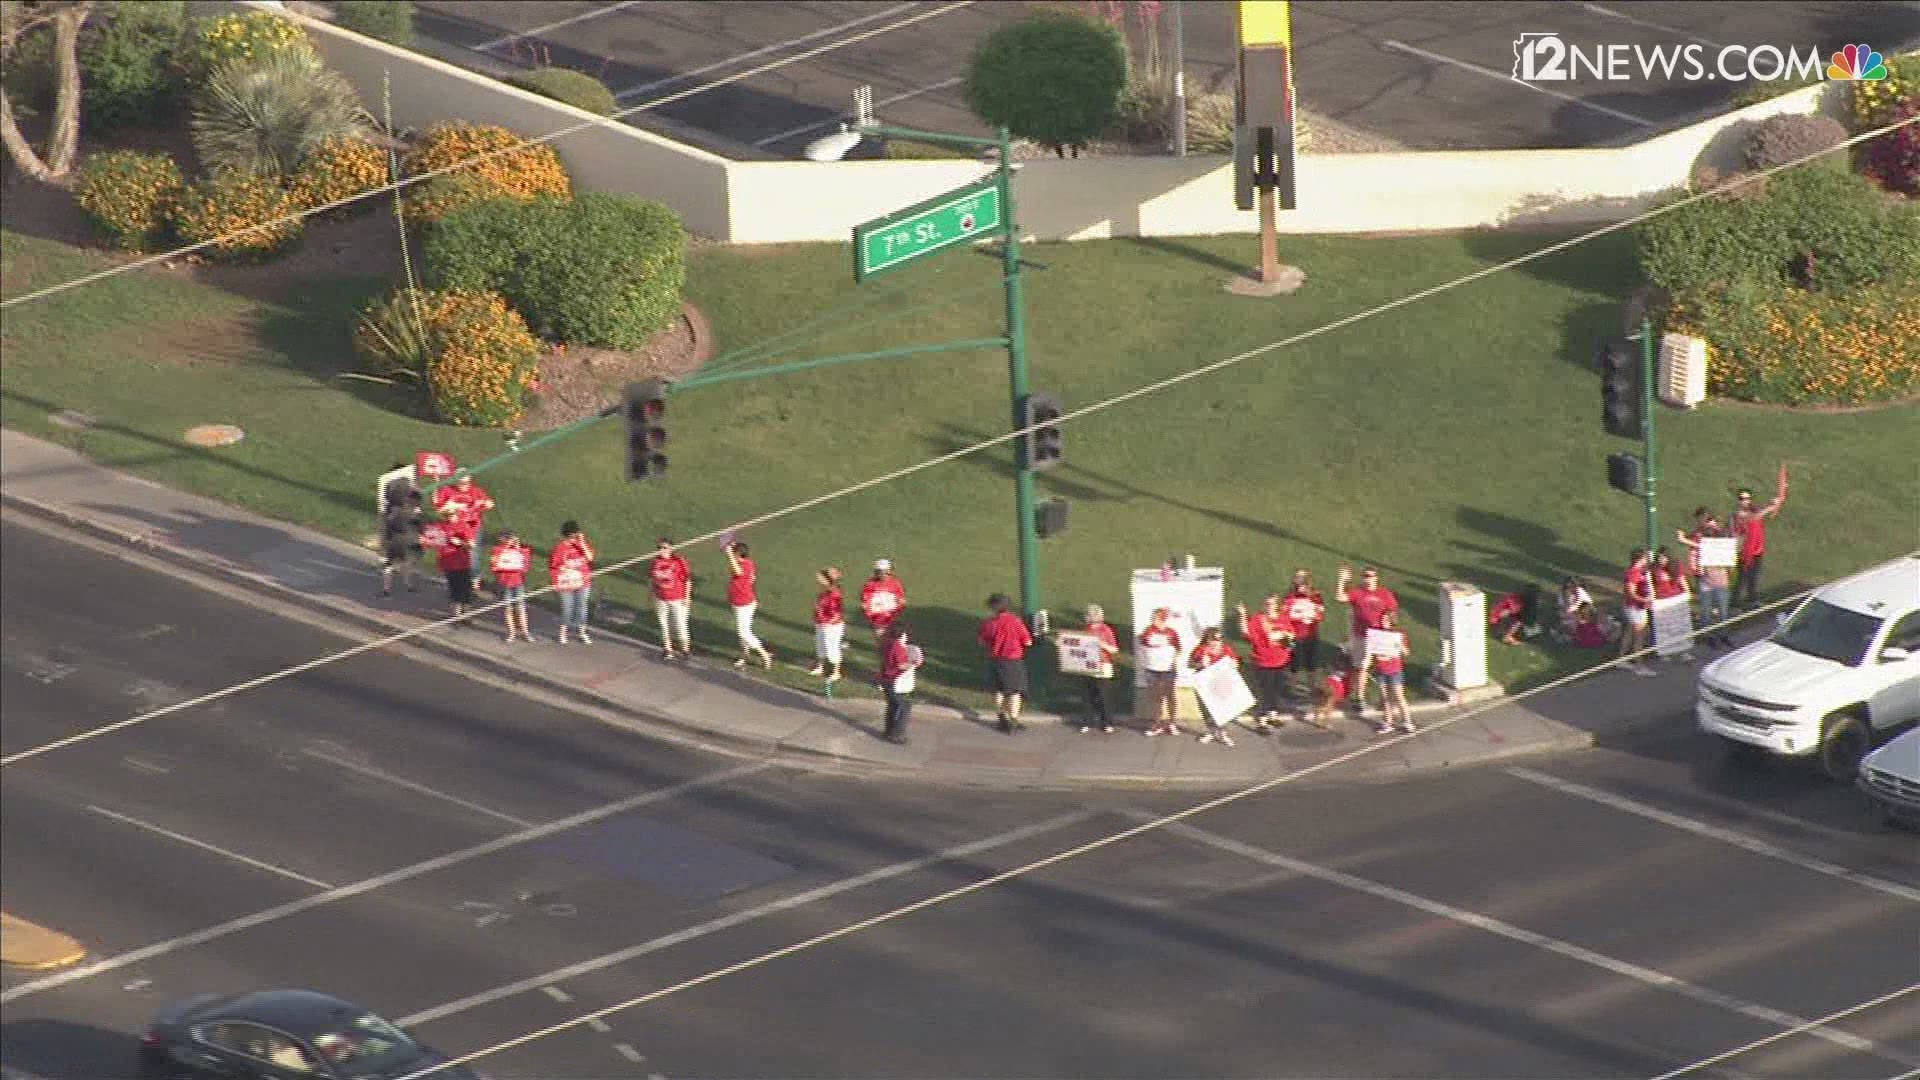 Teachers march in support of the #RedForEd movement for public education investment.